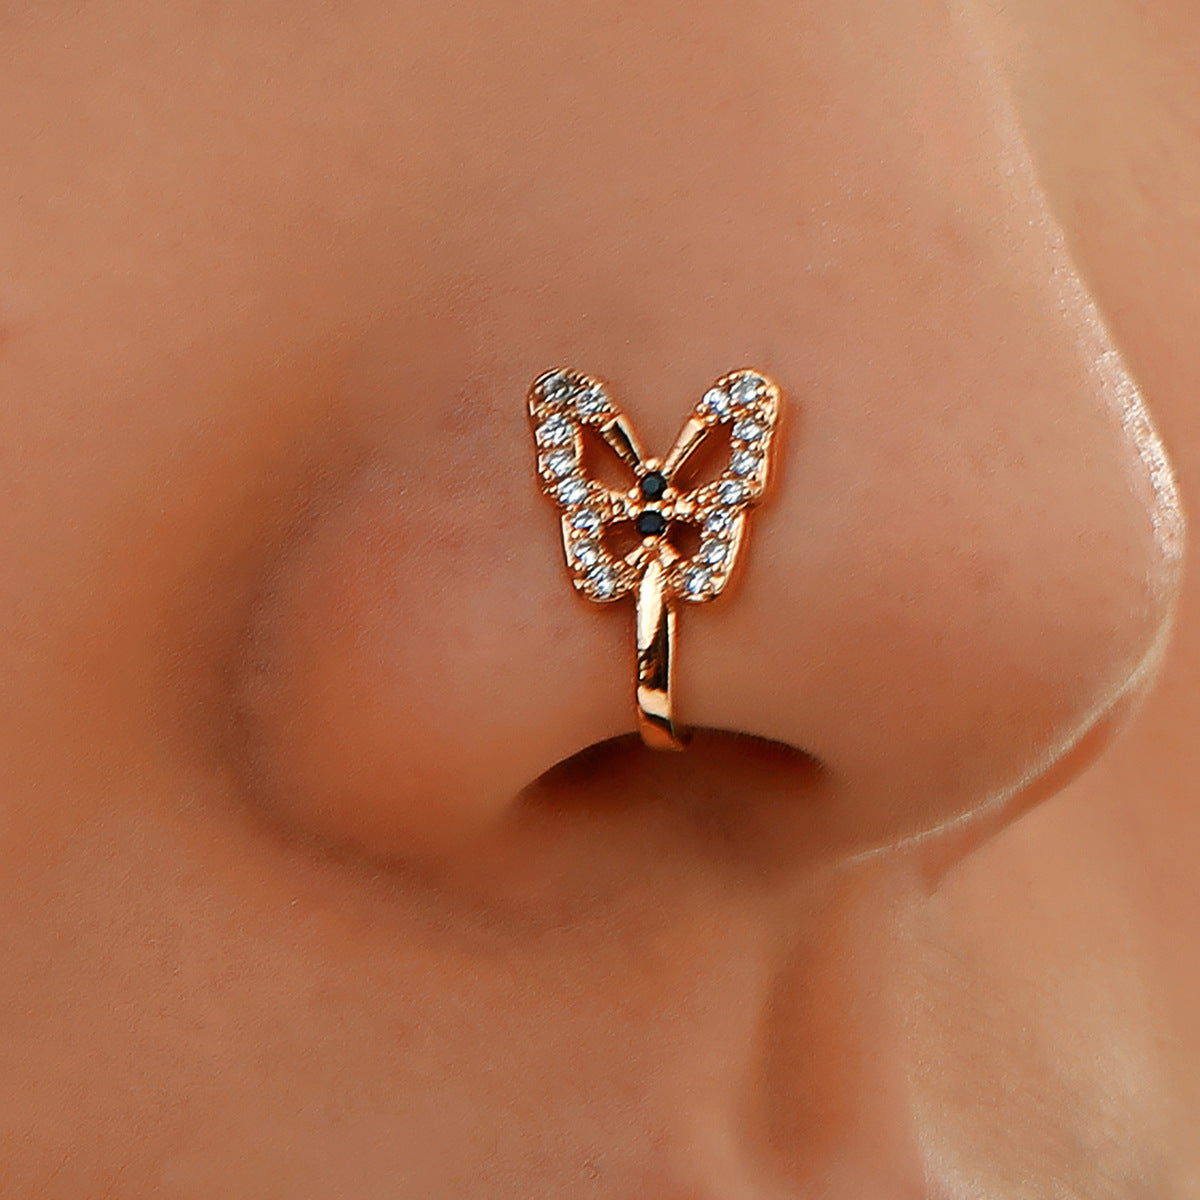 Add a Touch of Delicate Charm with our Butterfly U-shaped Fake Nose Ring for Women and Girls - Perfect for Everyday Wear!